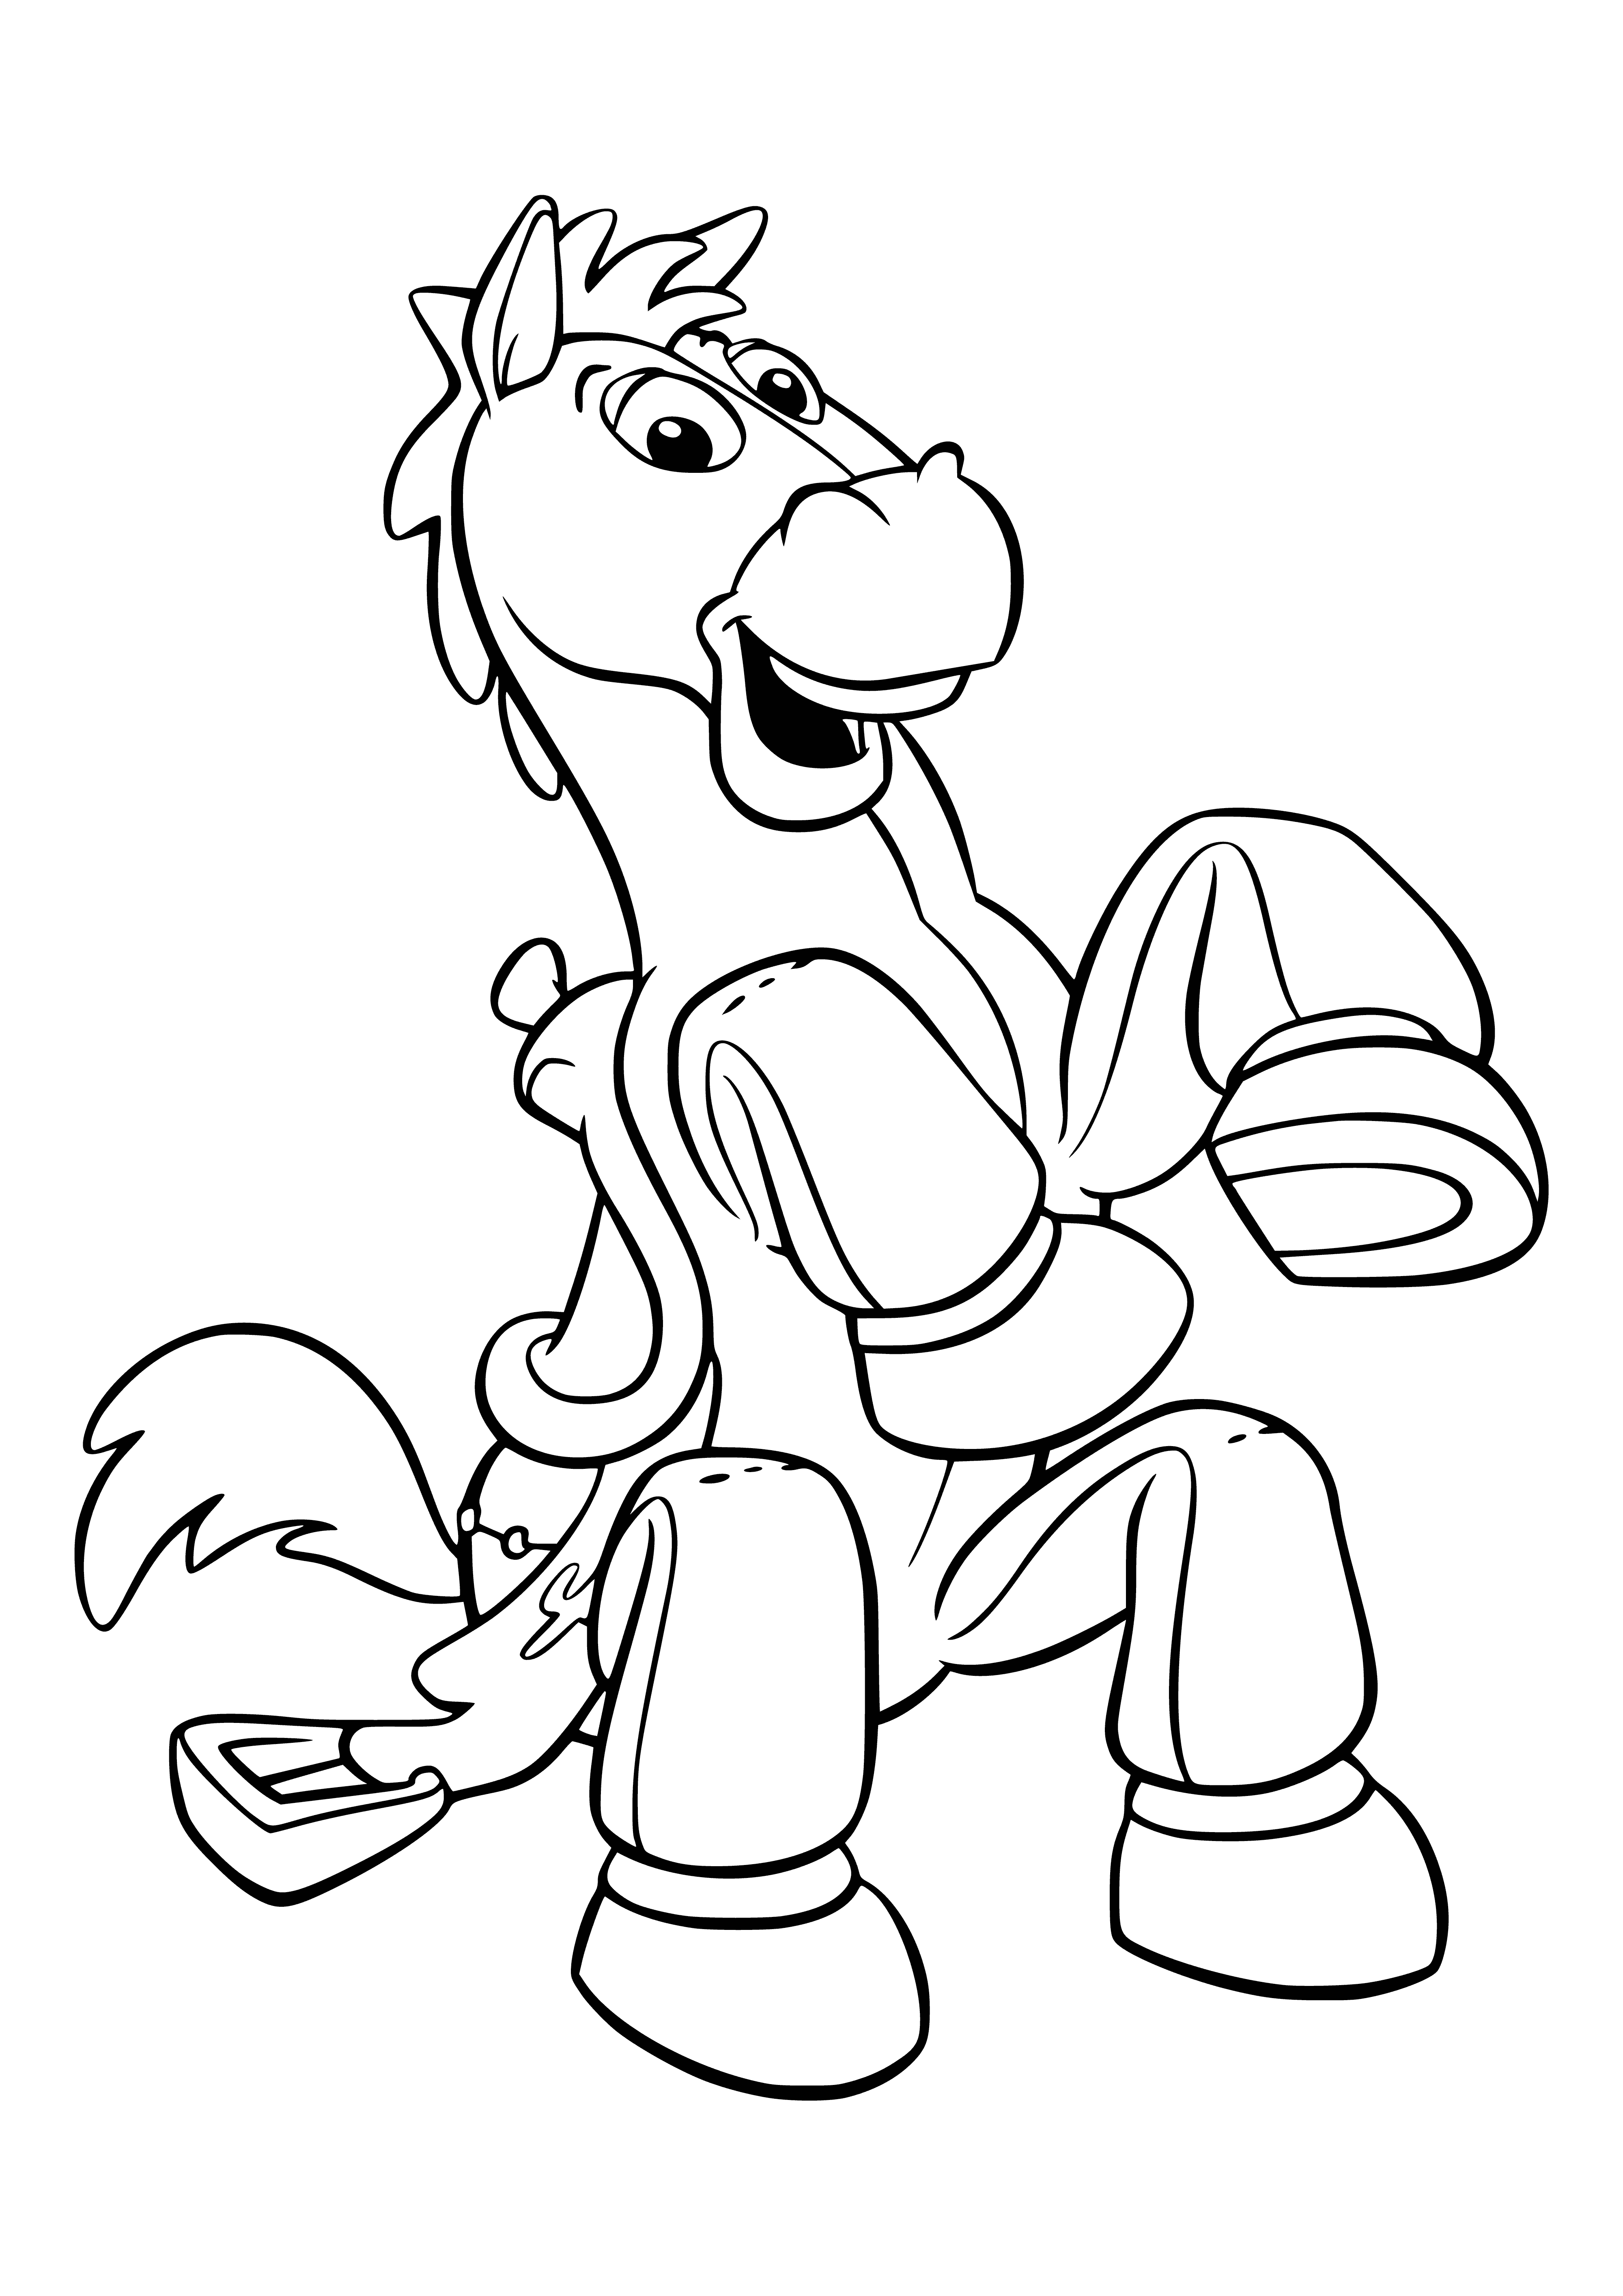 coloring page: 140 characters: The Bullzai horse is a red and white horse with blue saddle, black mane & tail, and yellow star on its forehead.